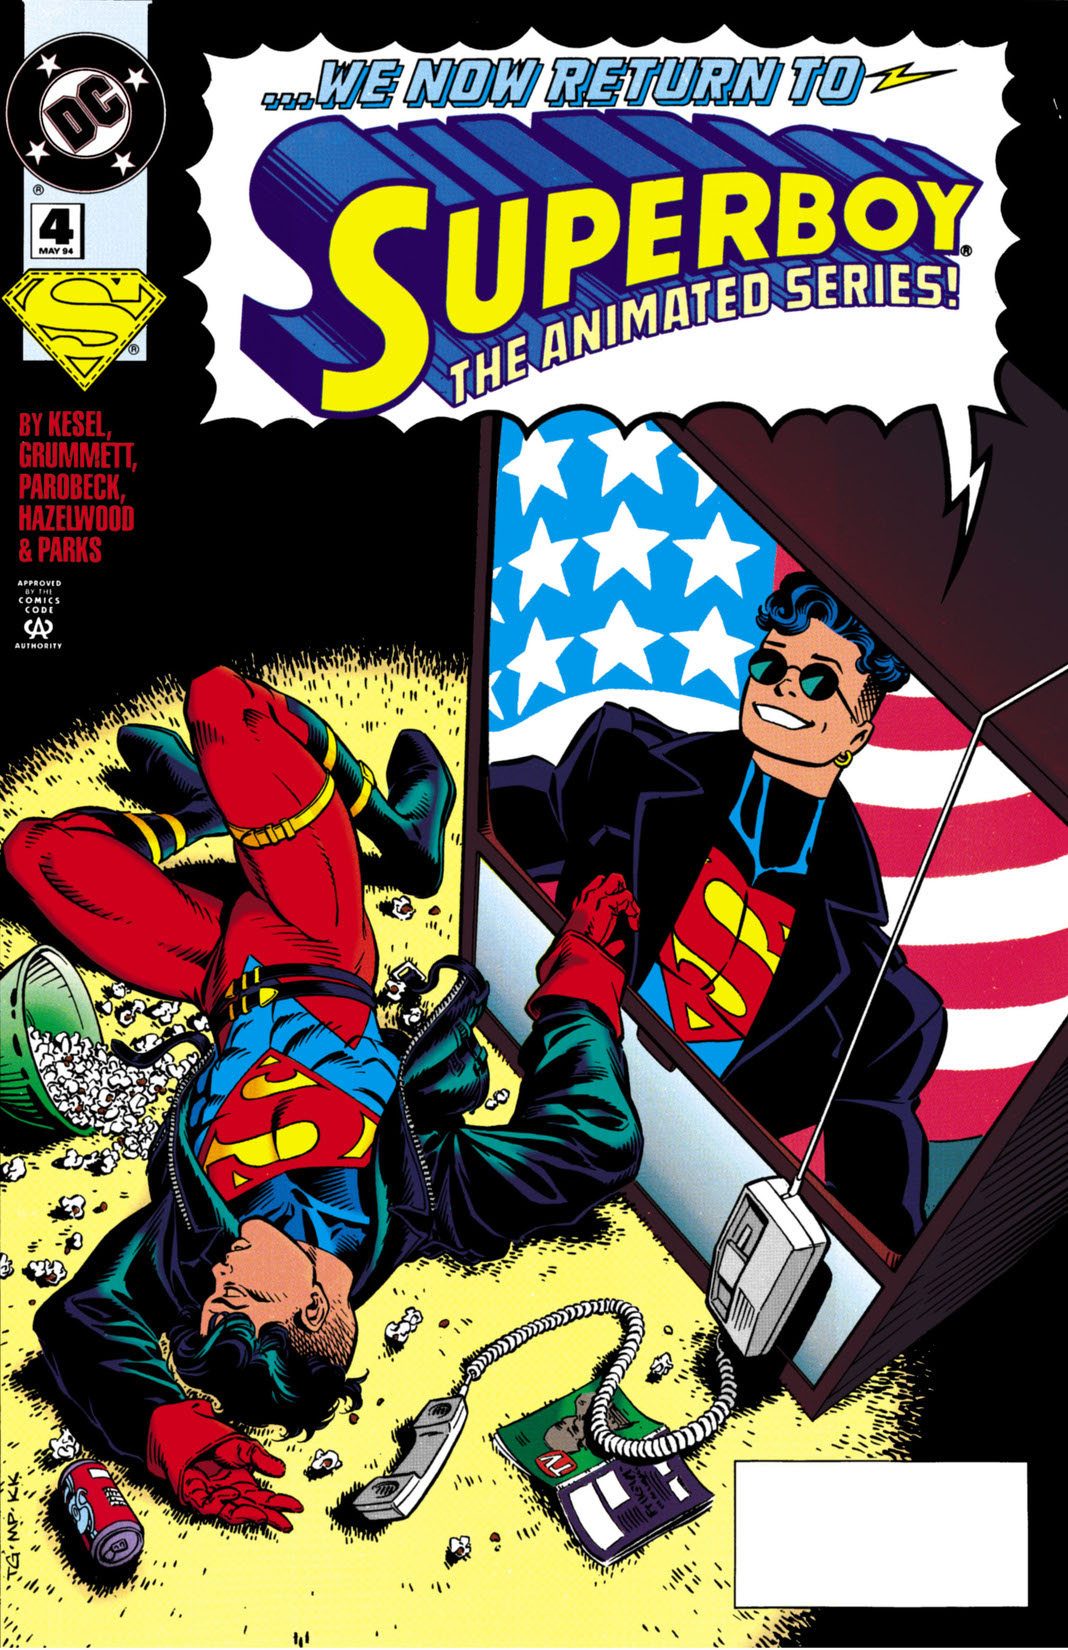 Superboy (1993-) #4 preview images